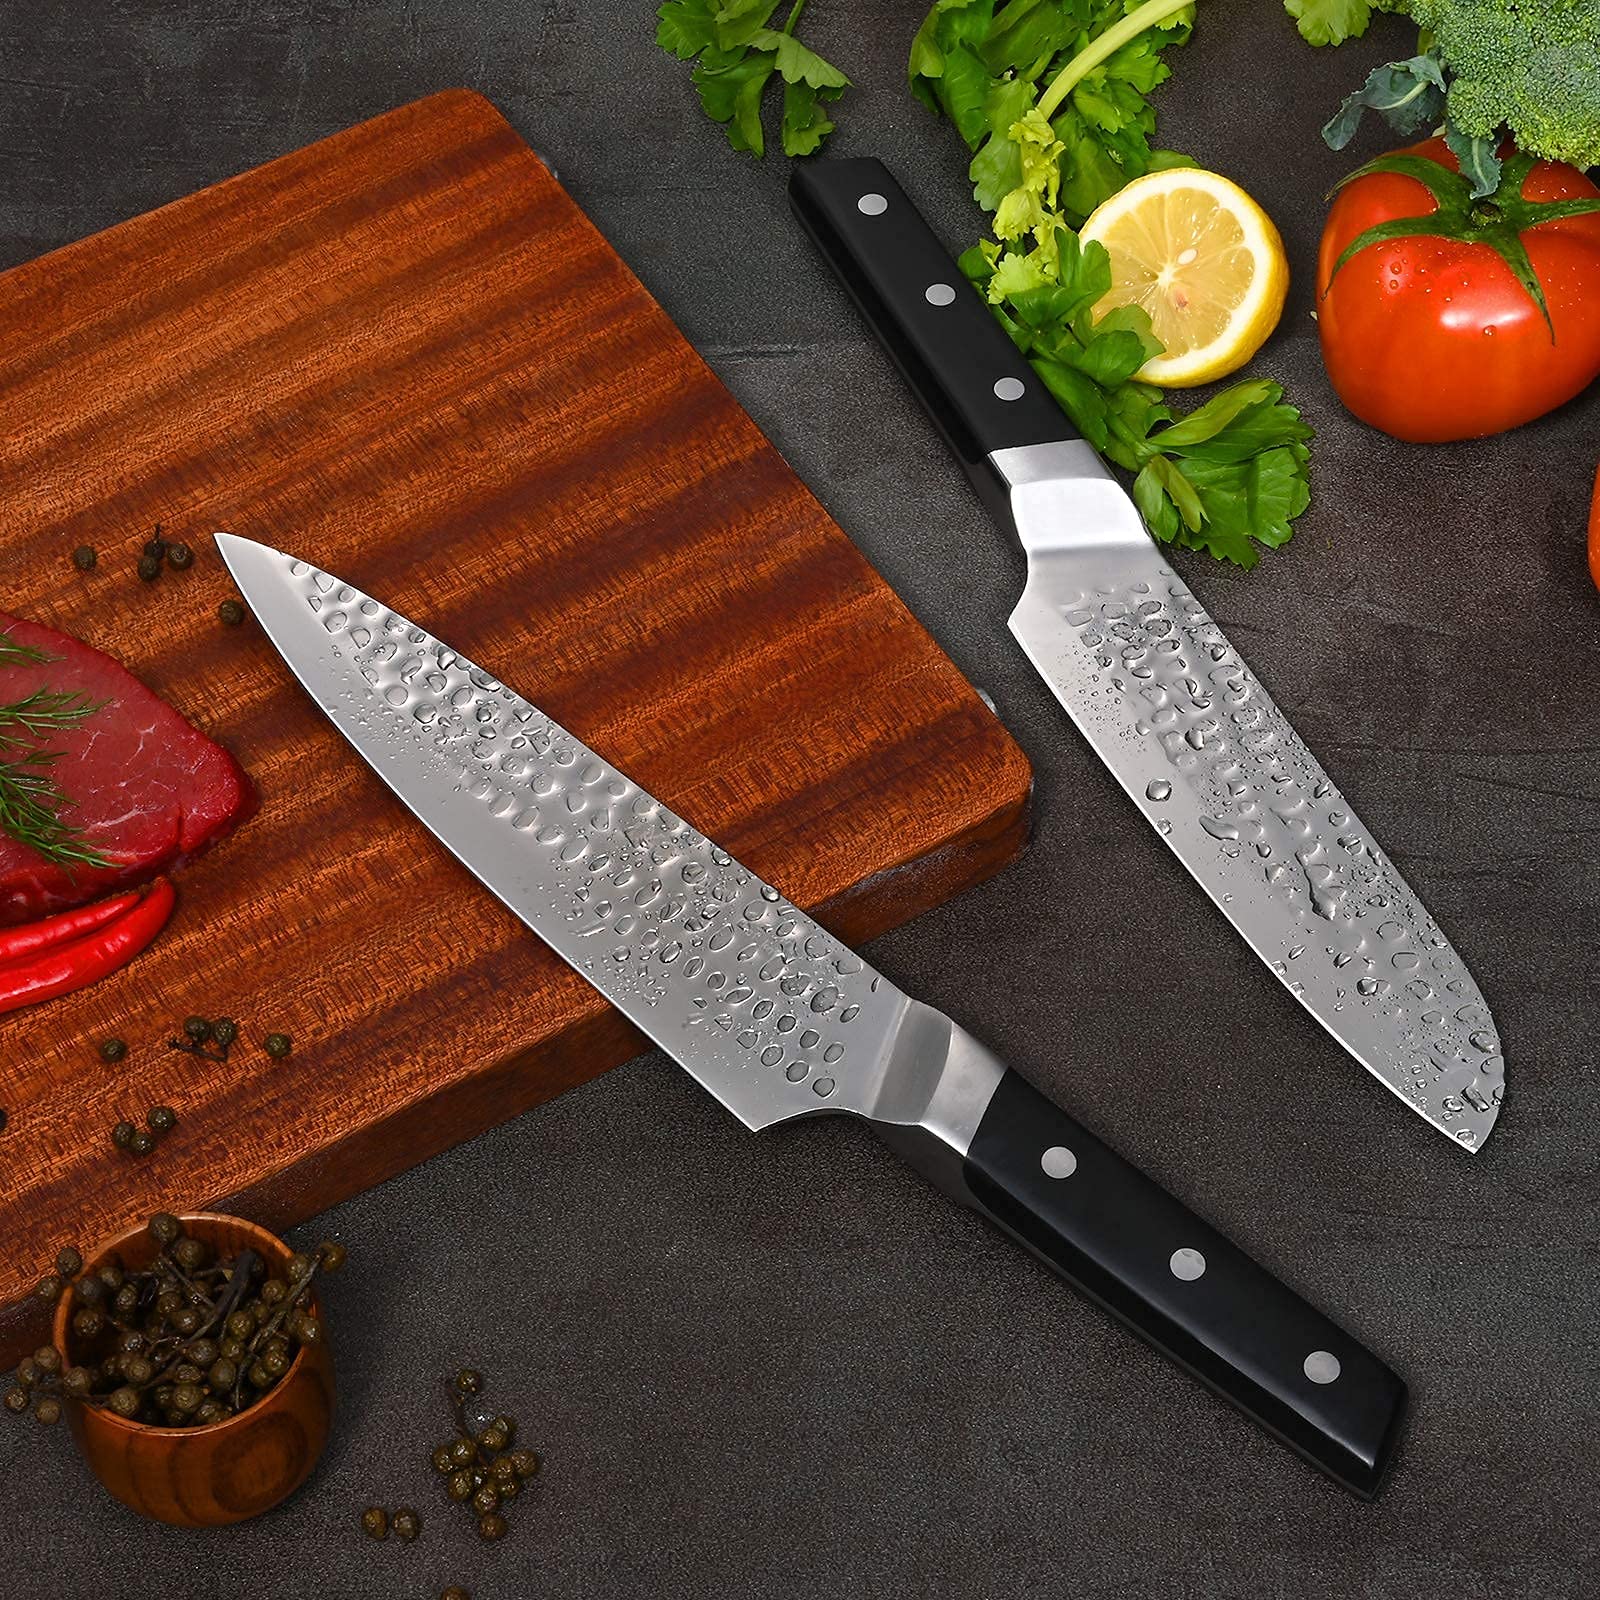 Professional Chef Knife, 8'' Chef's Knife and 7'' Santoku Knife, German High Carbon Stainless Steel Knife with Ergonomic Handle, Ergonomic Handle, Ultra Sharp Kitchen Knife Set with Gift Box - 2 Pcs